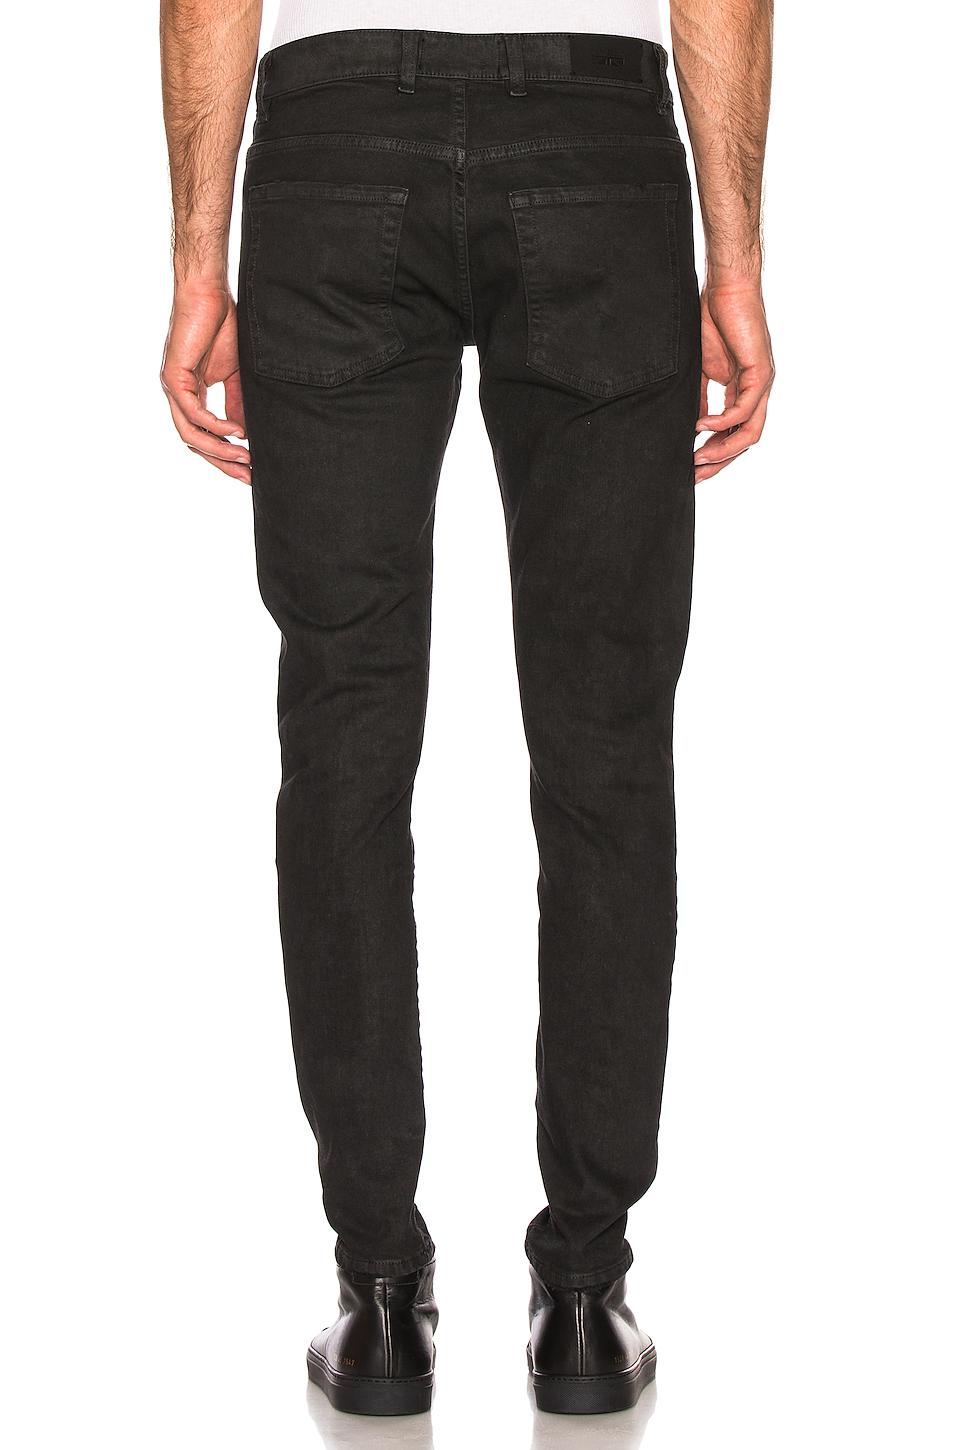 Represent Essential Waxed Denim Jeans in Black for Men - Lyst